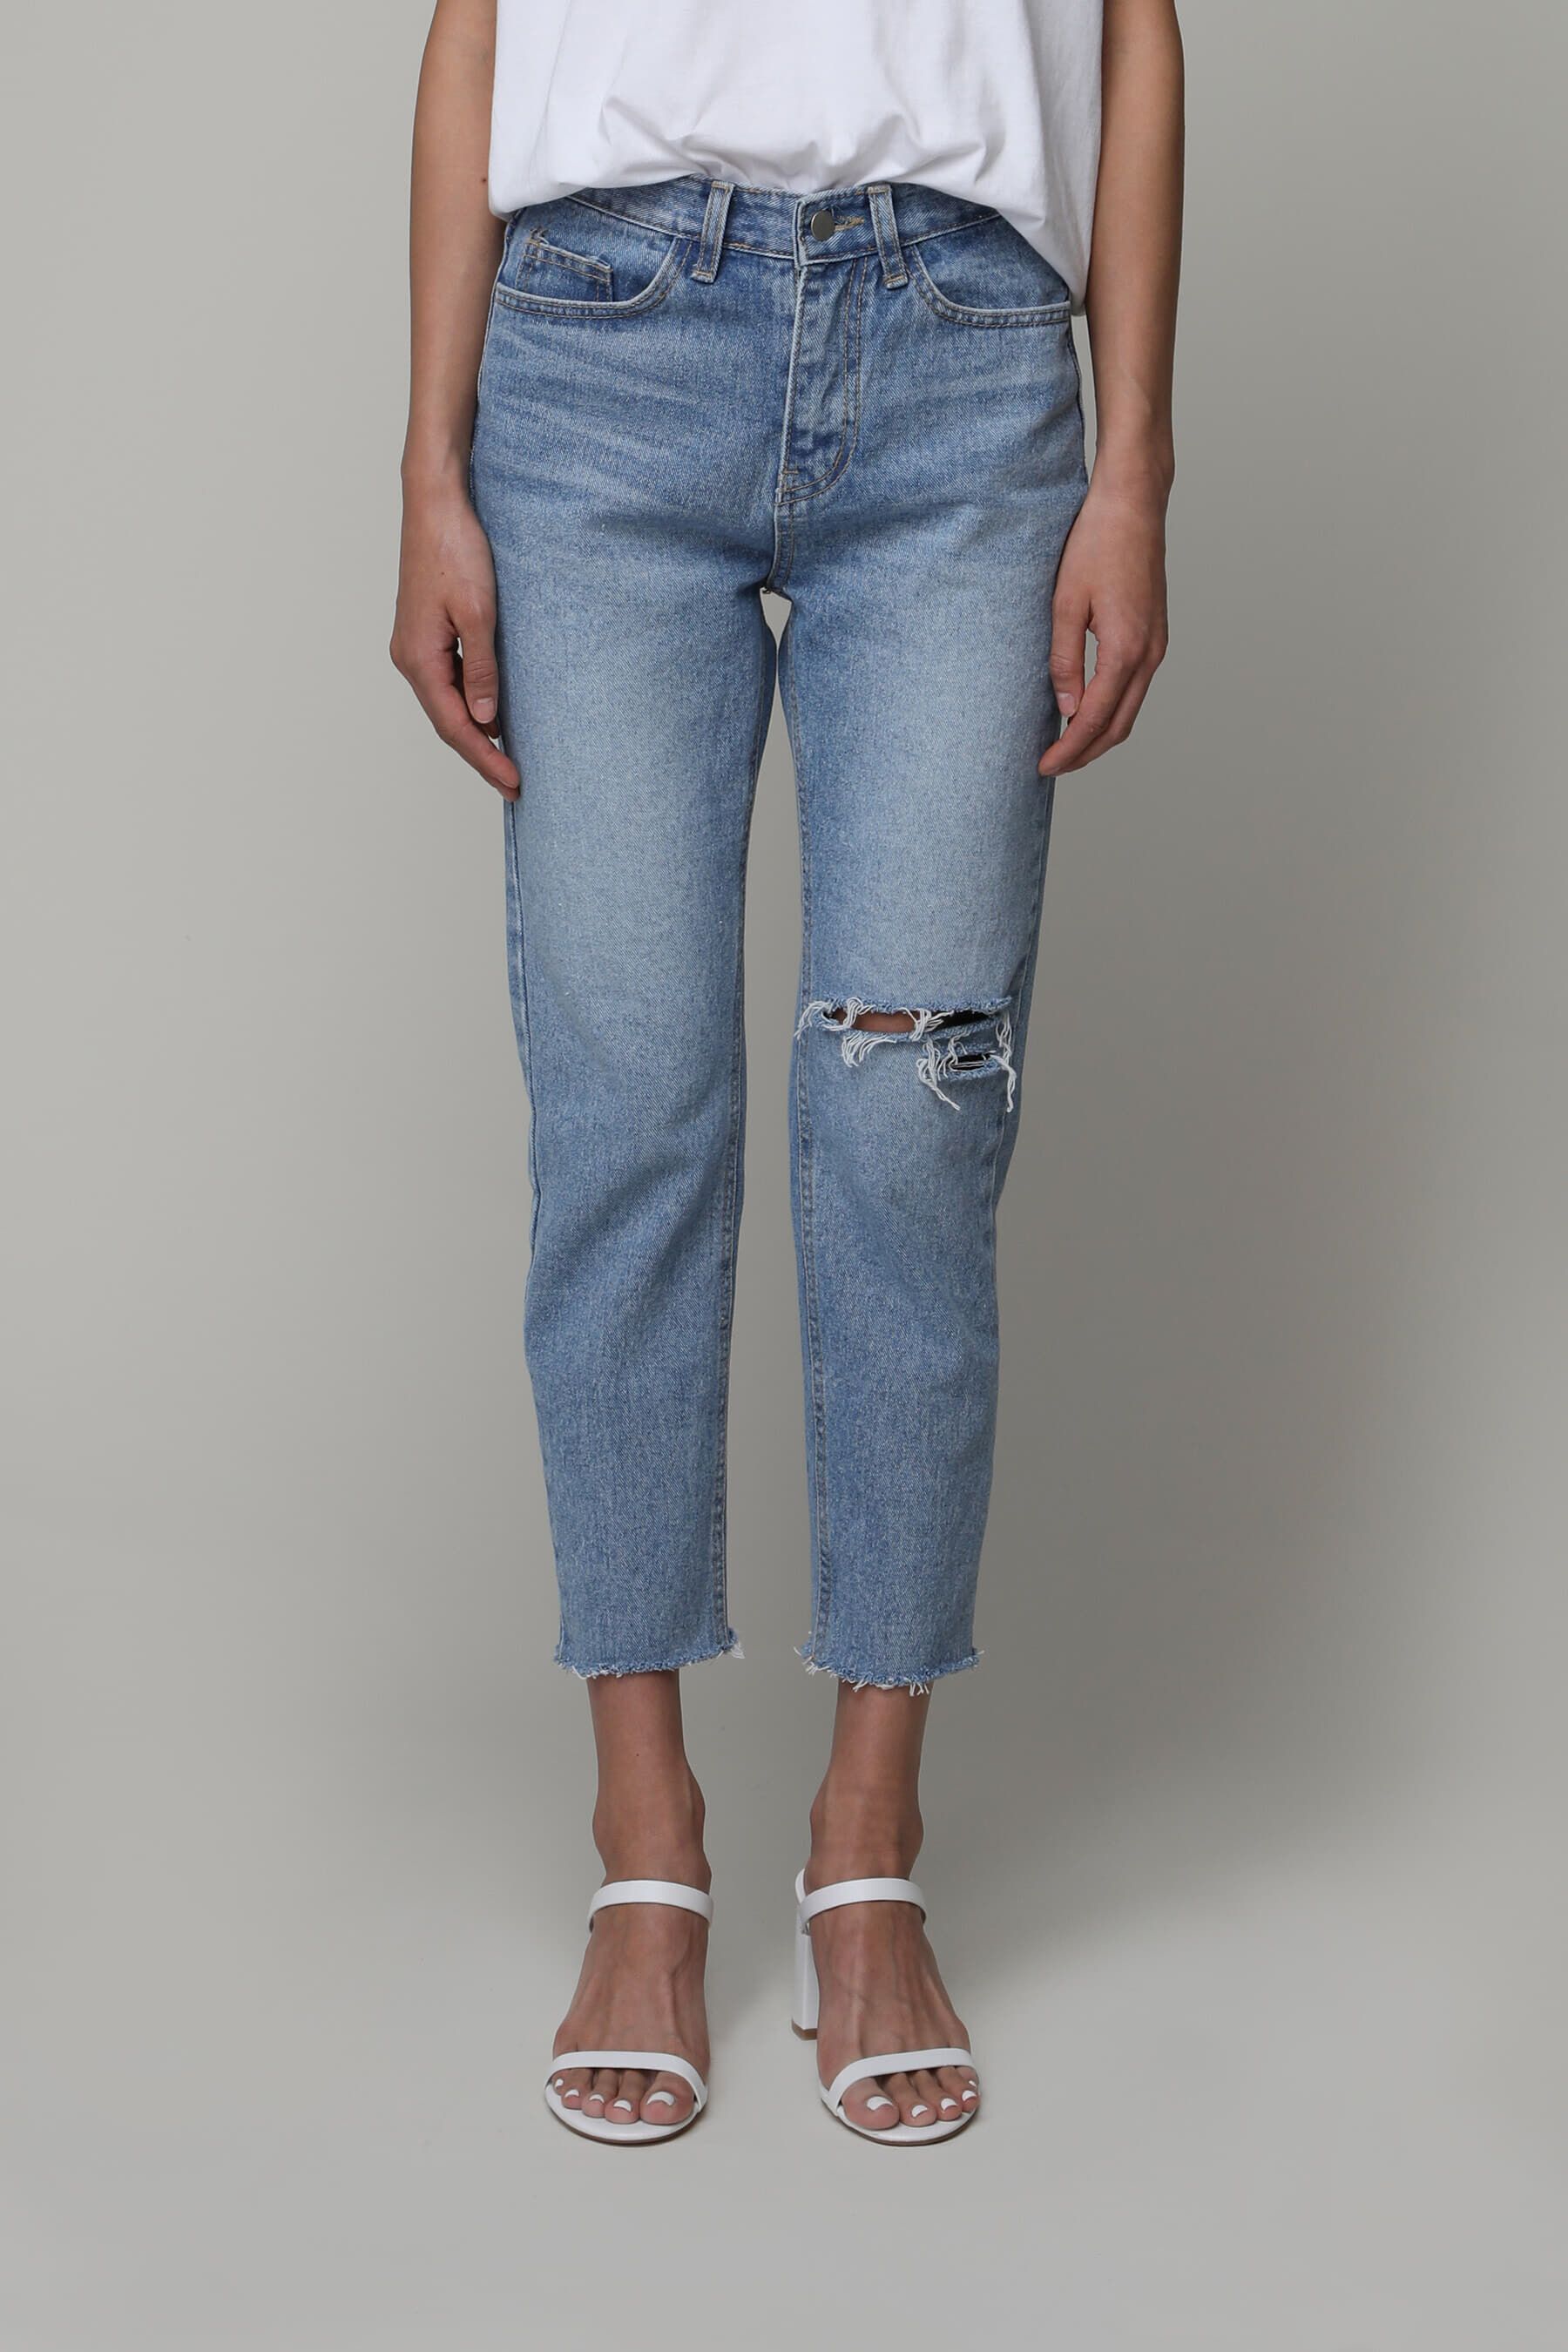 oat  fort ripped knee jeans